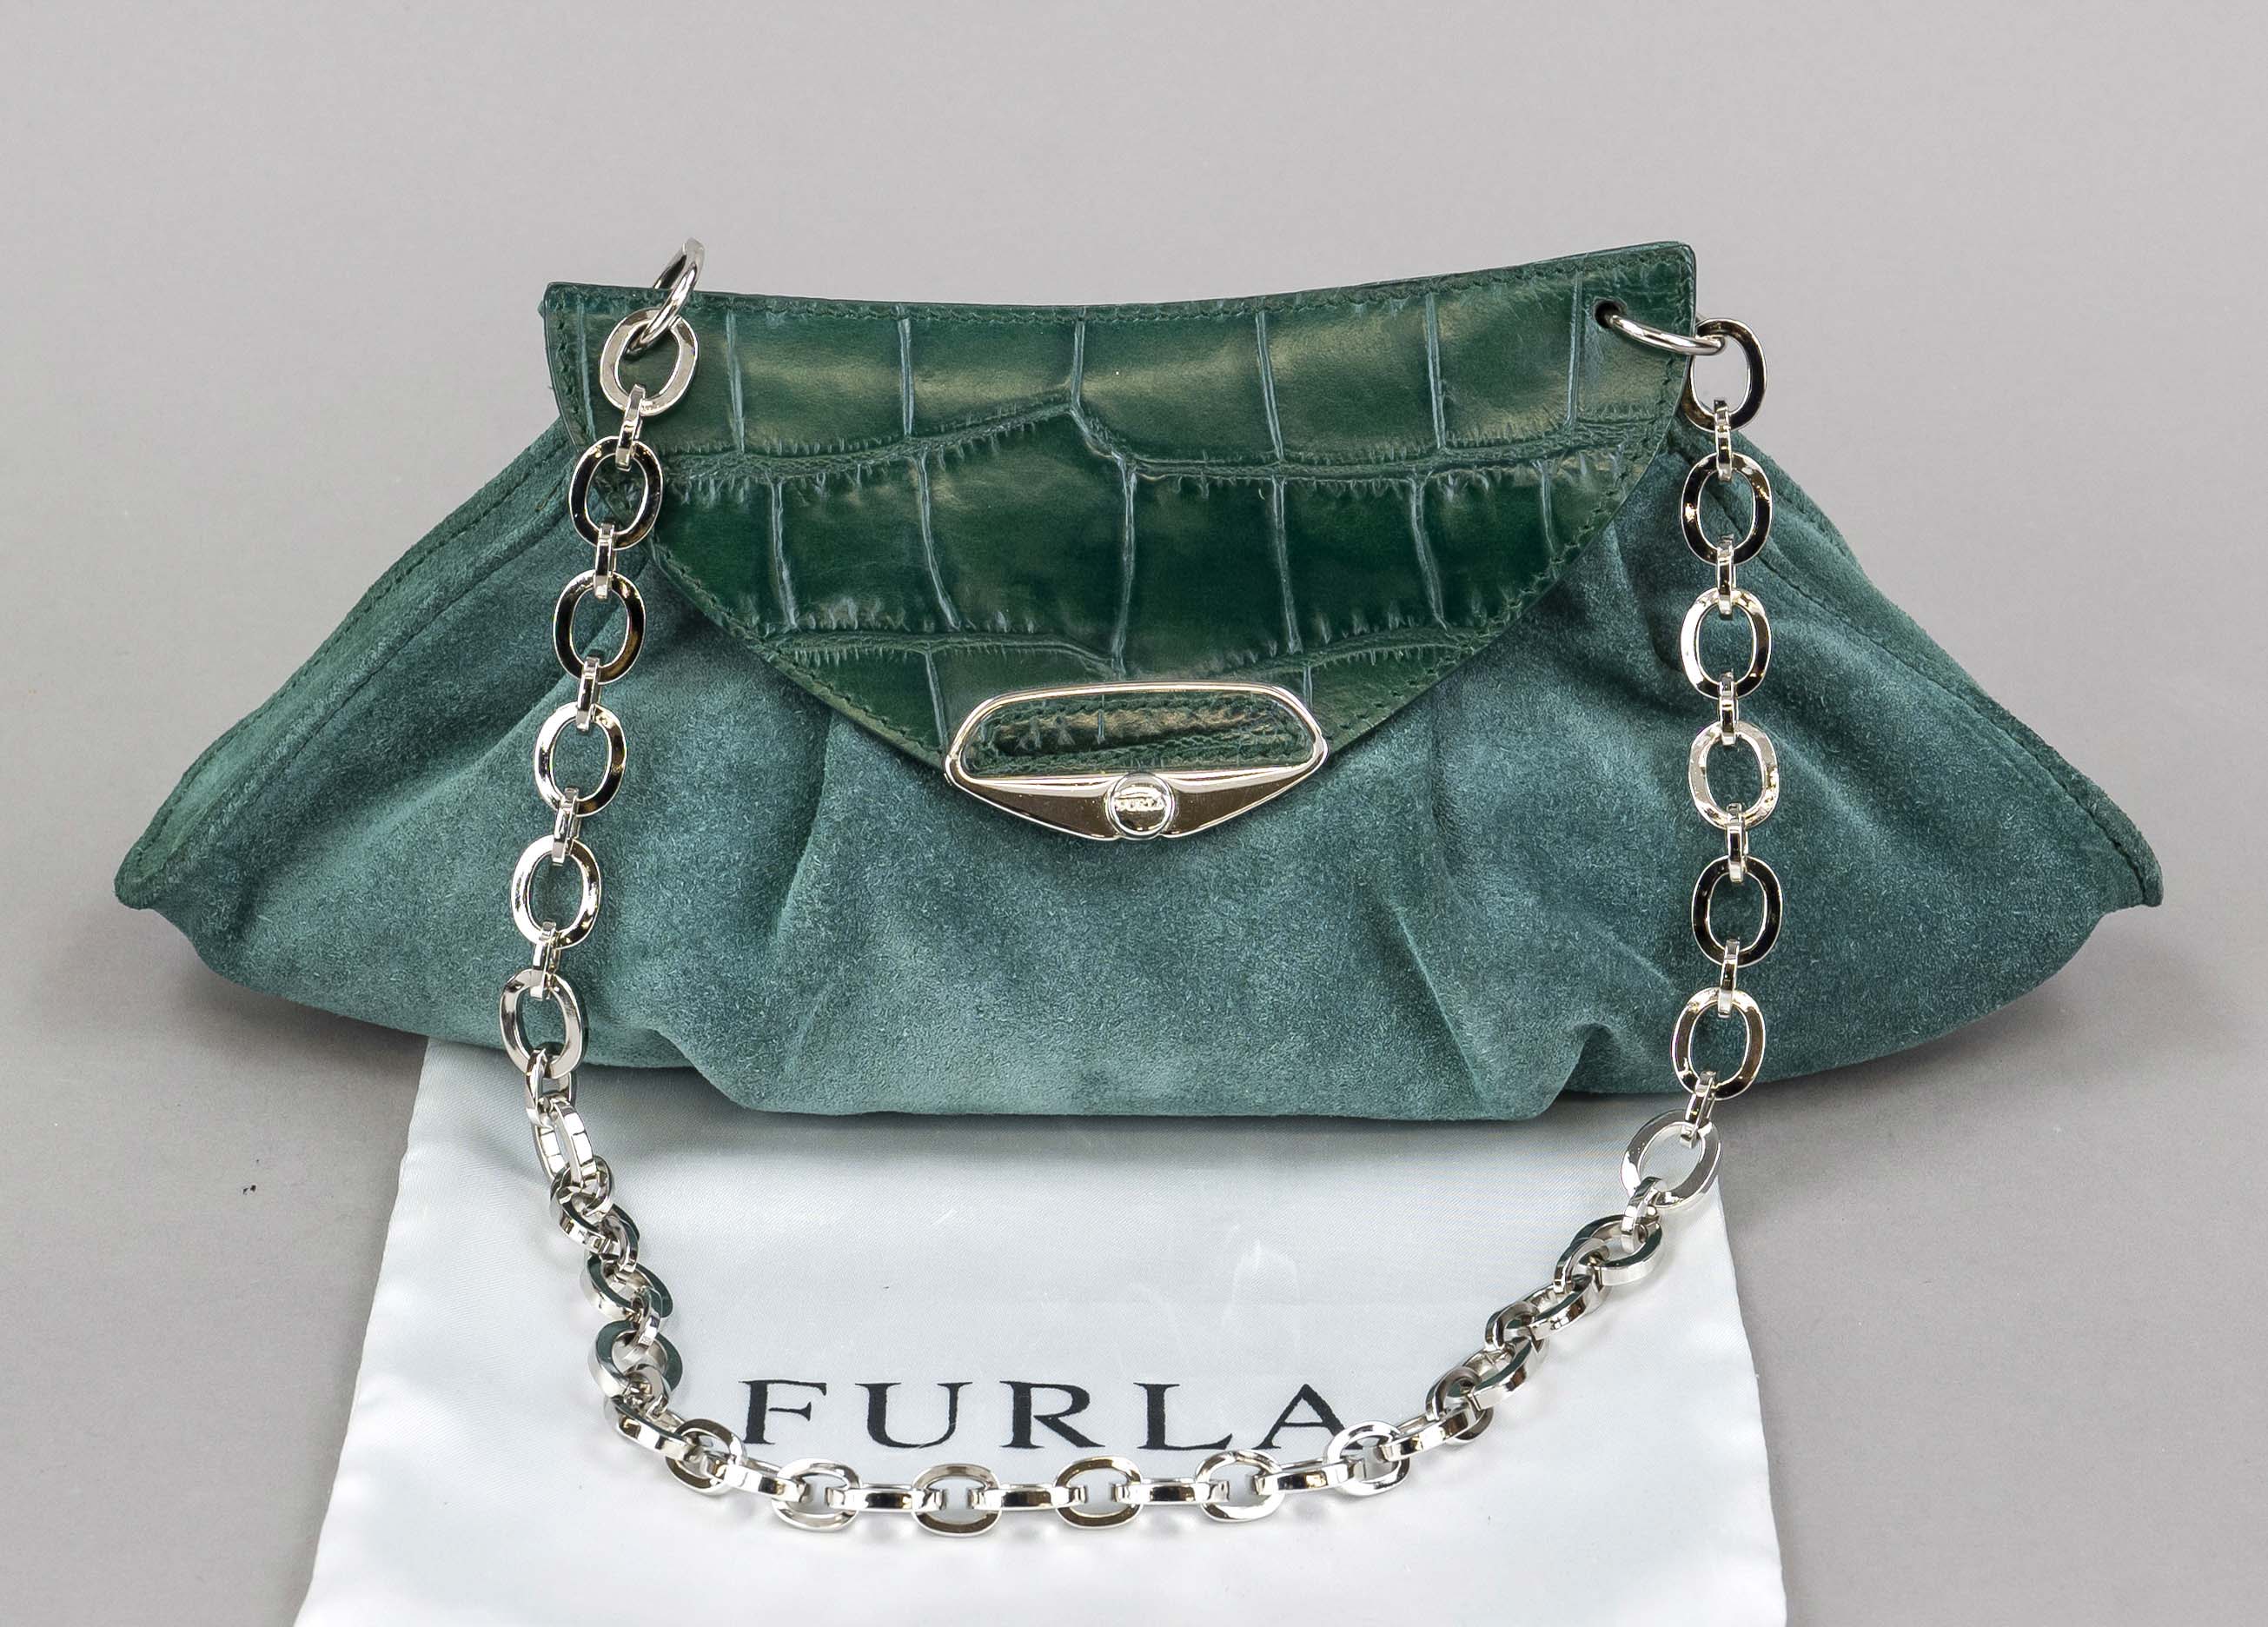 Furla, Small Vintage Suede Leather Evening Bag, fir green suede with details in smooth leather of